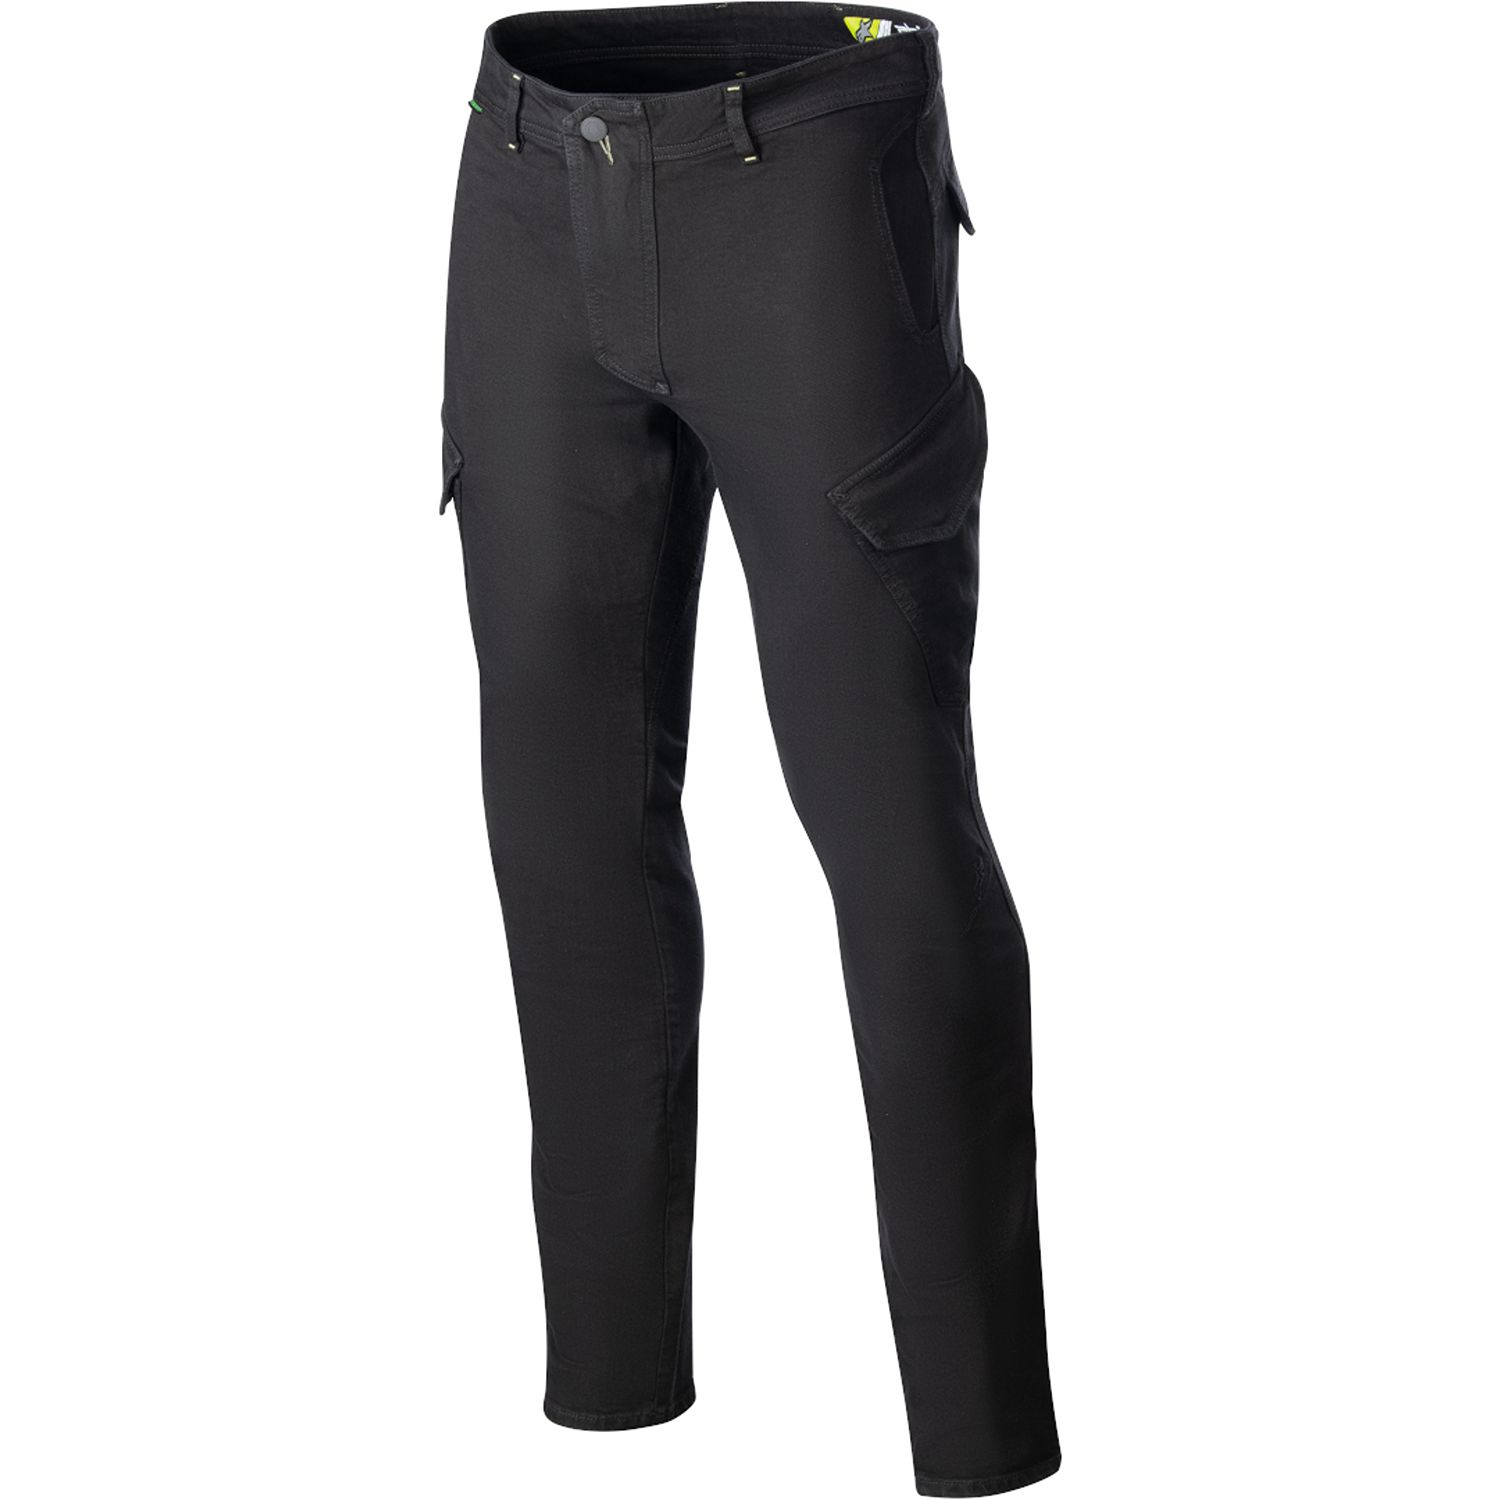 Image of Alpinestars Caliber Slim Fit Tech Riding Pants Anthracite Taille 33